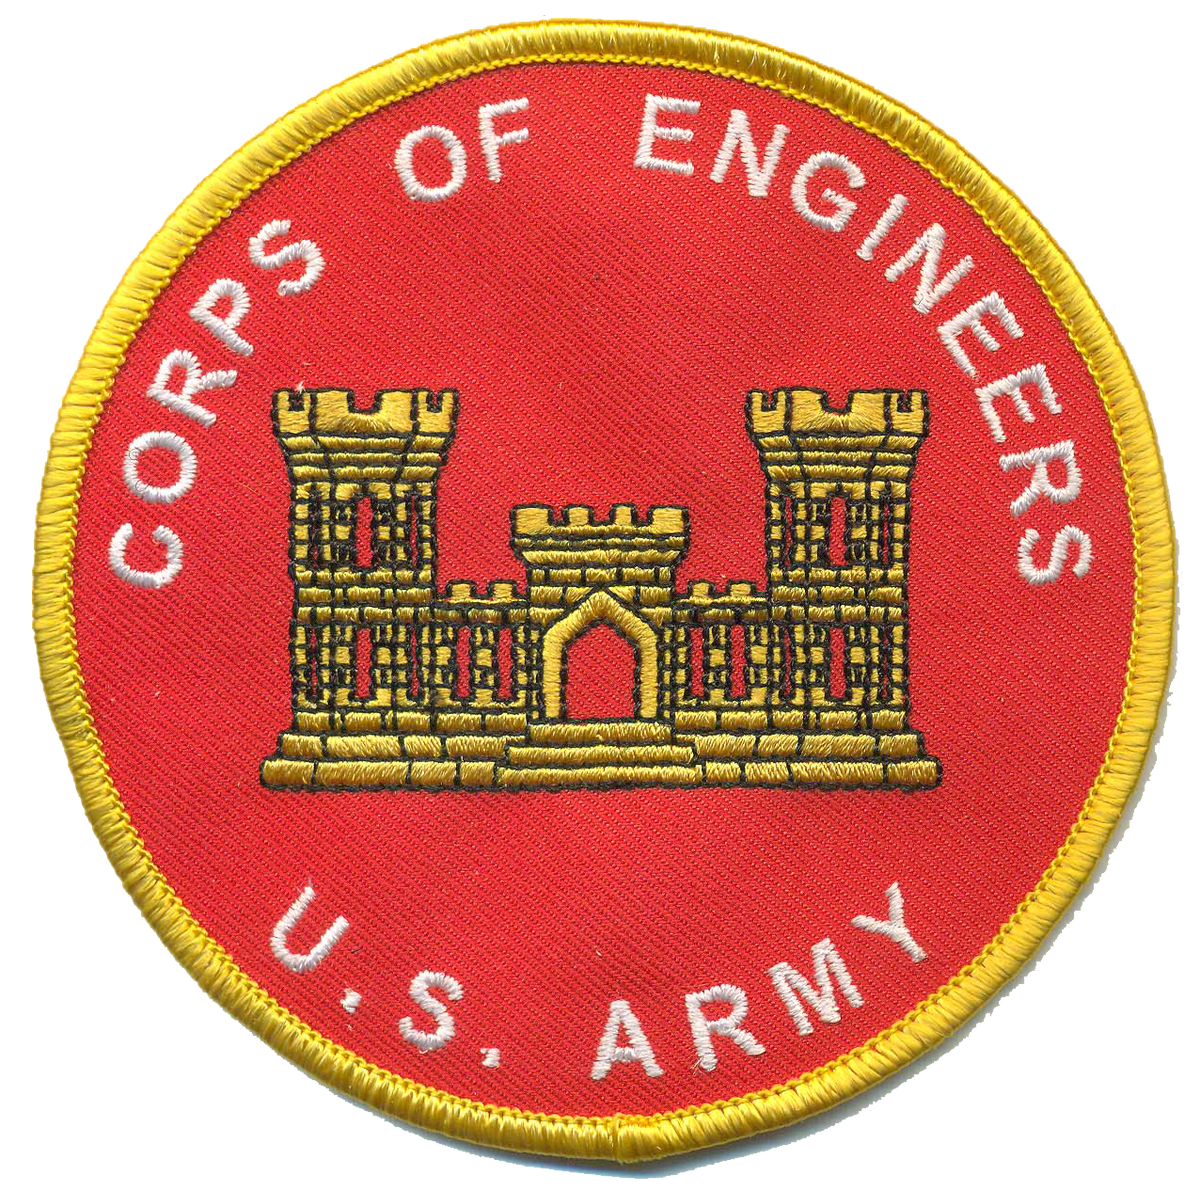 U.S. Army Corps of Engineers Novelty Patch